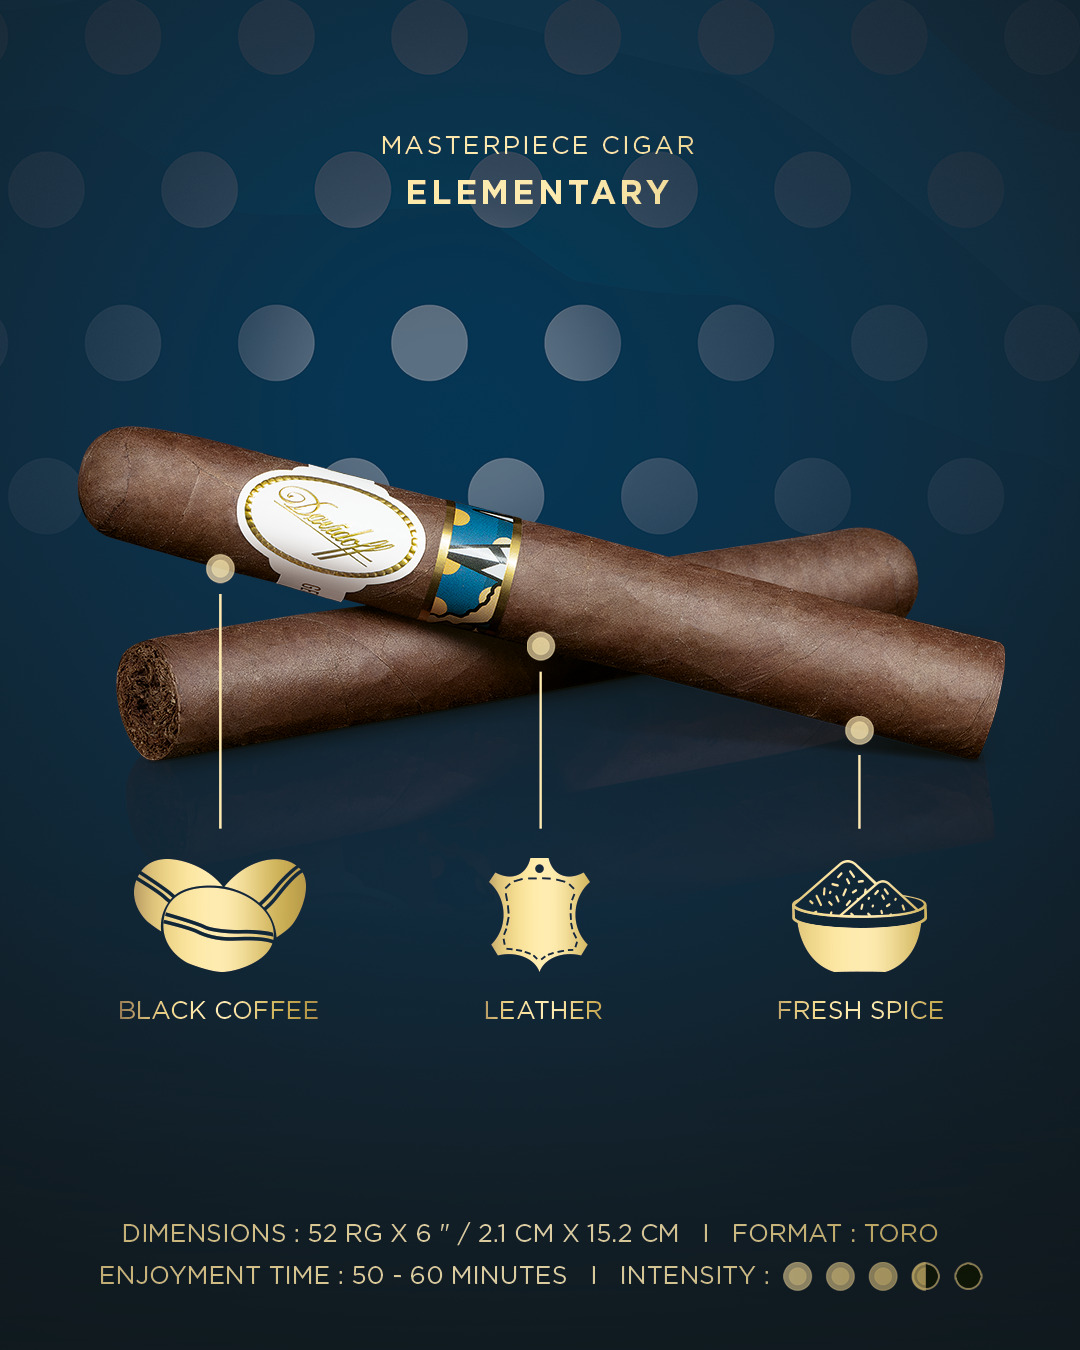 Two toro cigars which come with the Davidoff & Boyarde Masterpiece Humidor Elementary with blend details displayed, such as main aromas, enjoyment time and intensity.